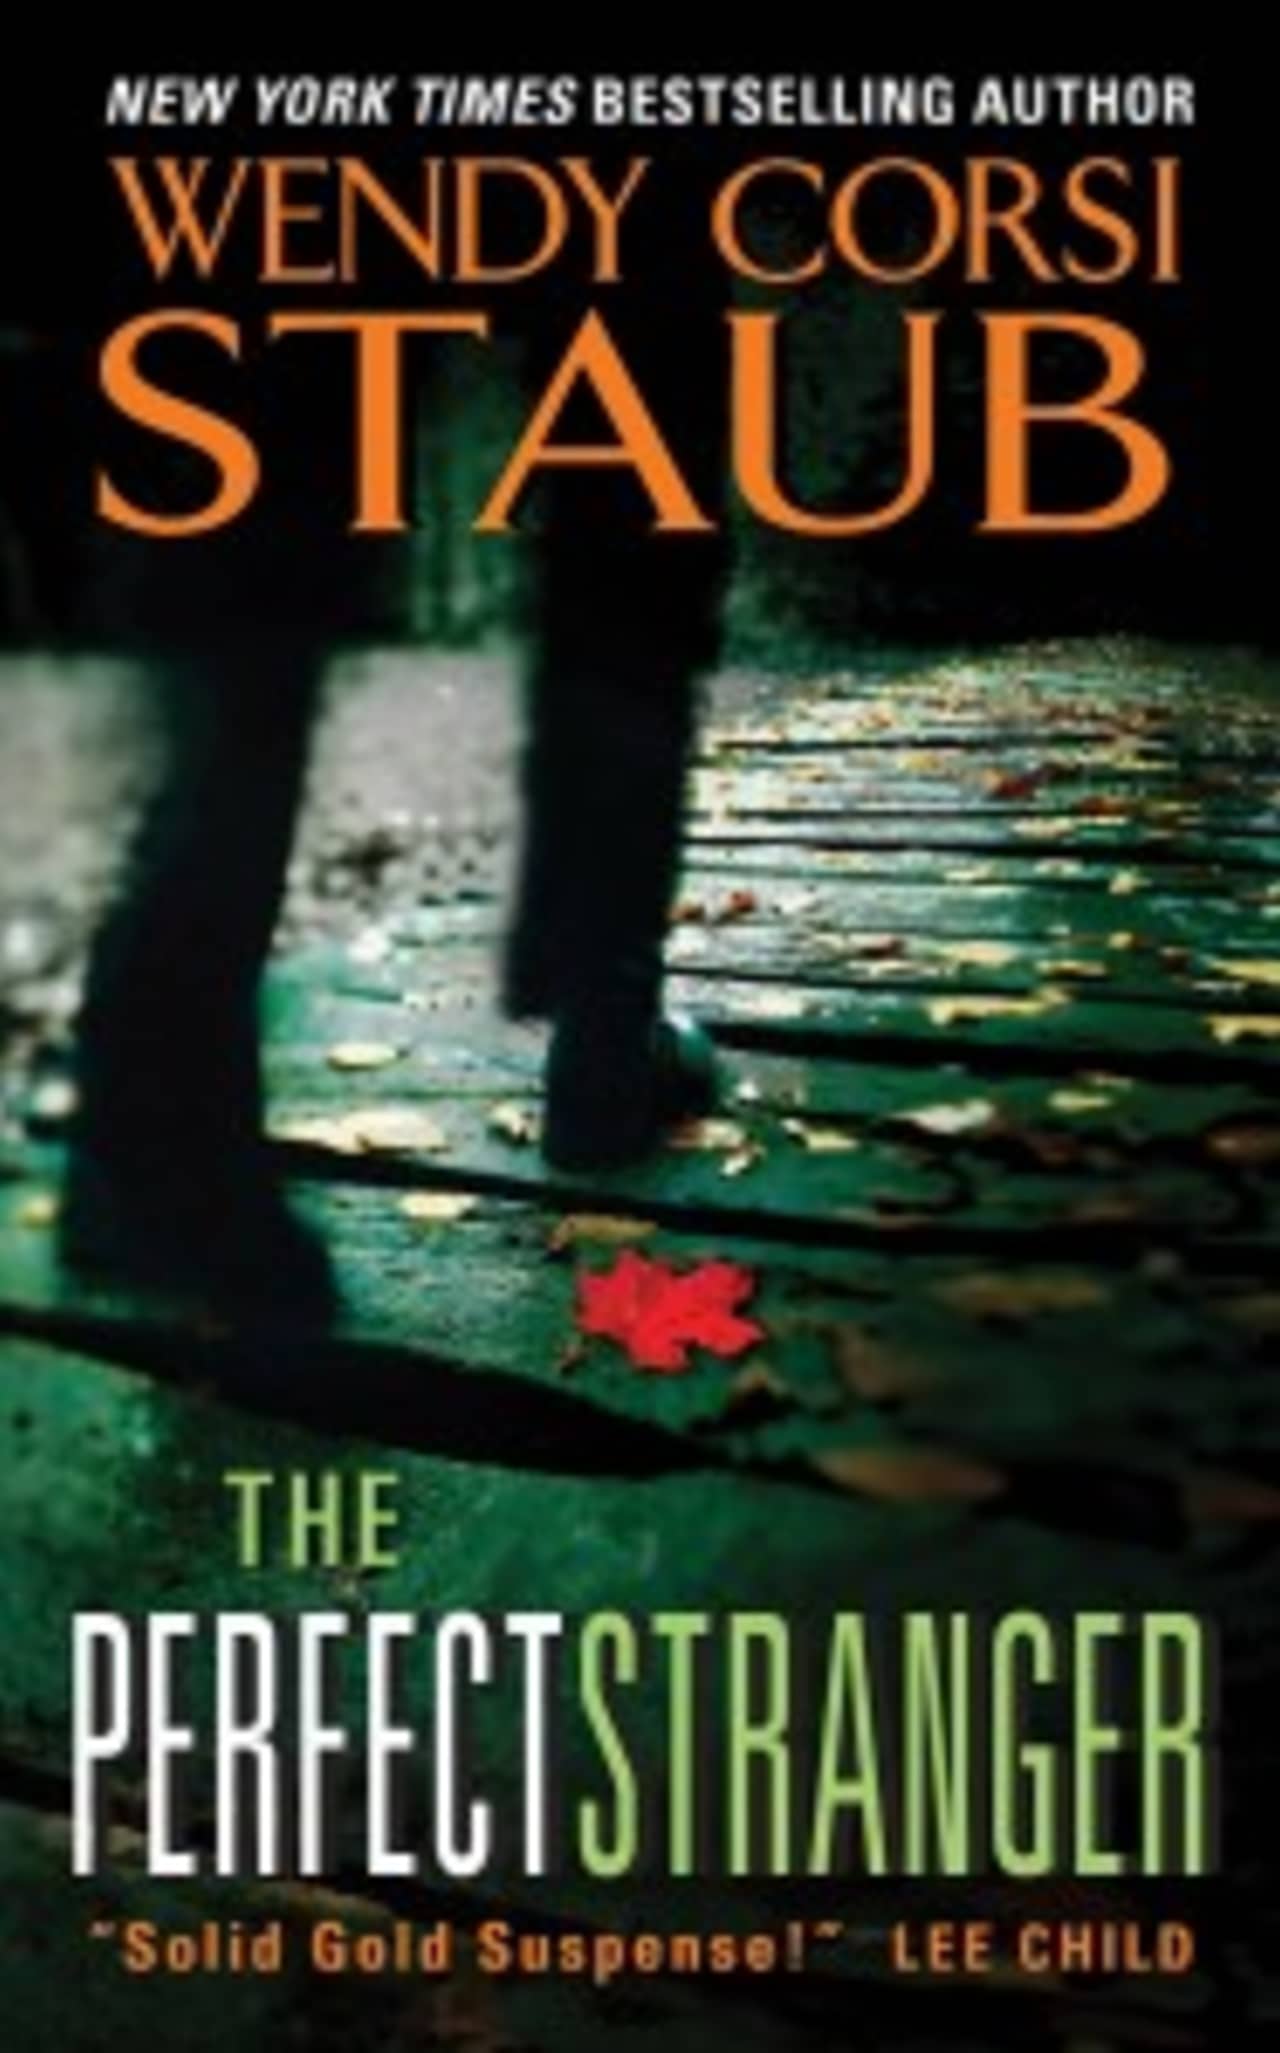 Author Wendy Corsi Staub will discuss her new novel, "The Perfect Stranger" at the Wilton Library.